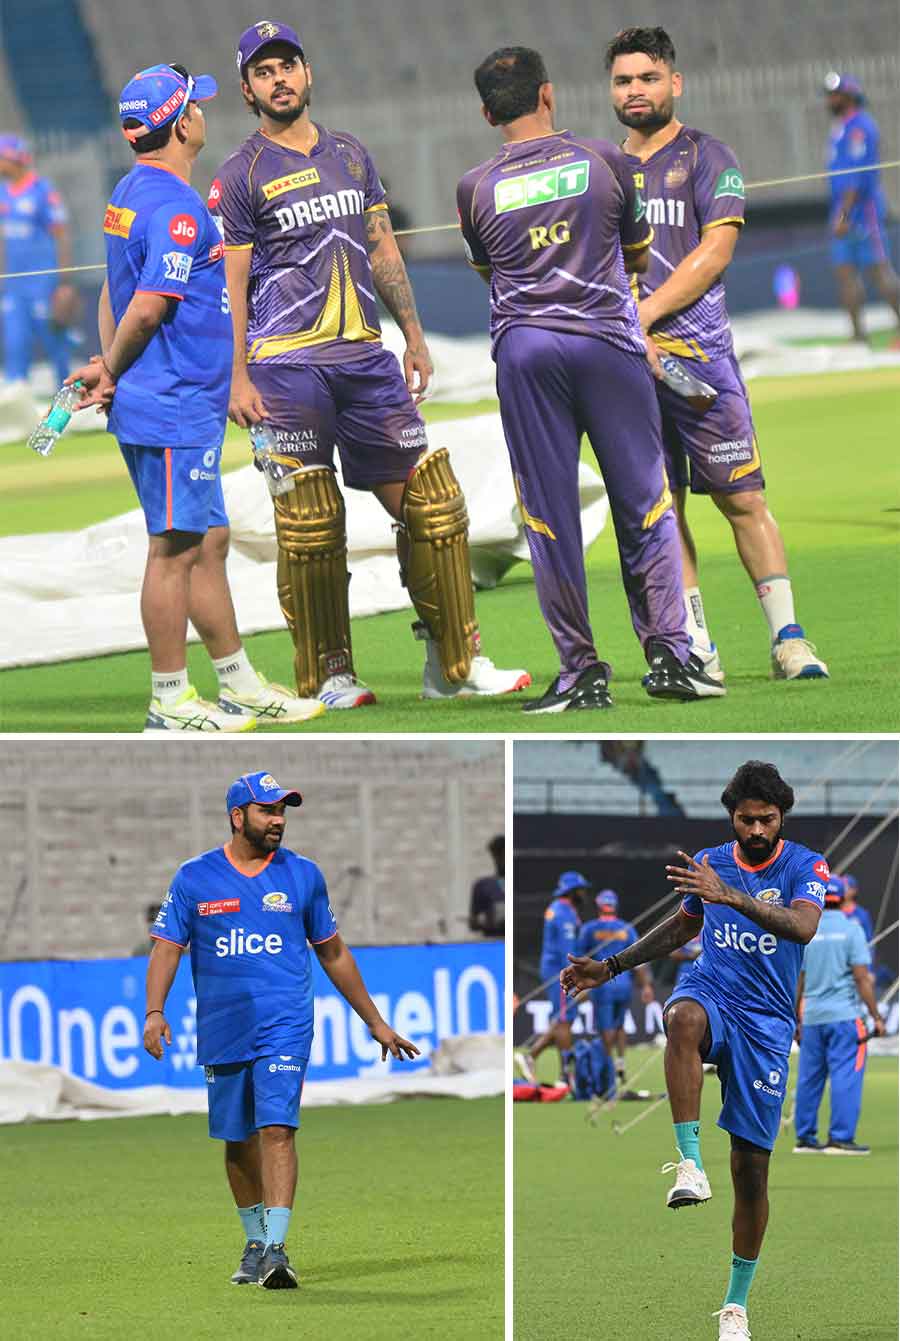 Kolkata Knight Riders will take on Mumbai Indians at the Eden Gardens on Saturday. Ahead of the match, the teams were spotted at the nets  